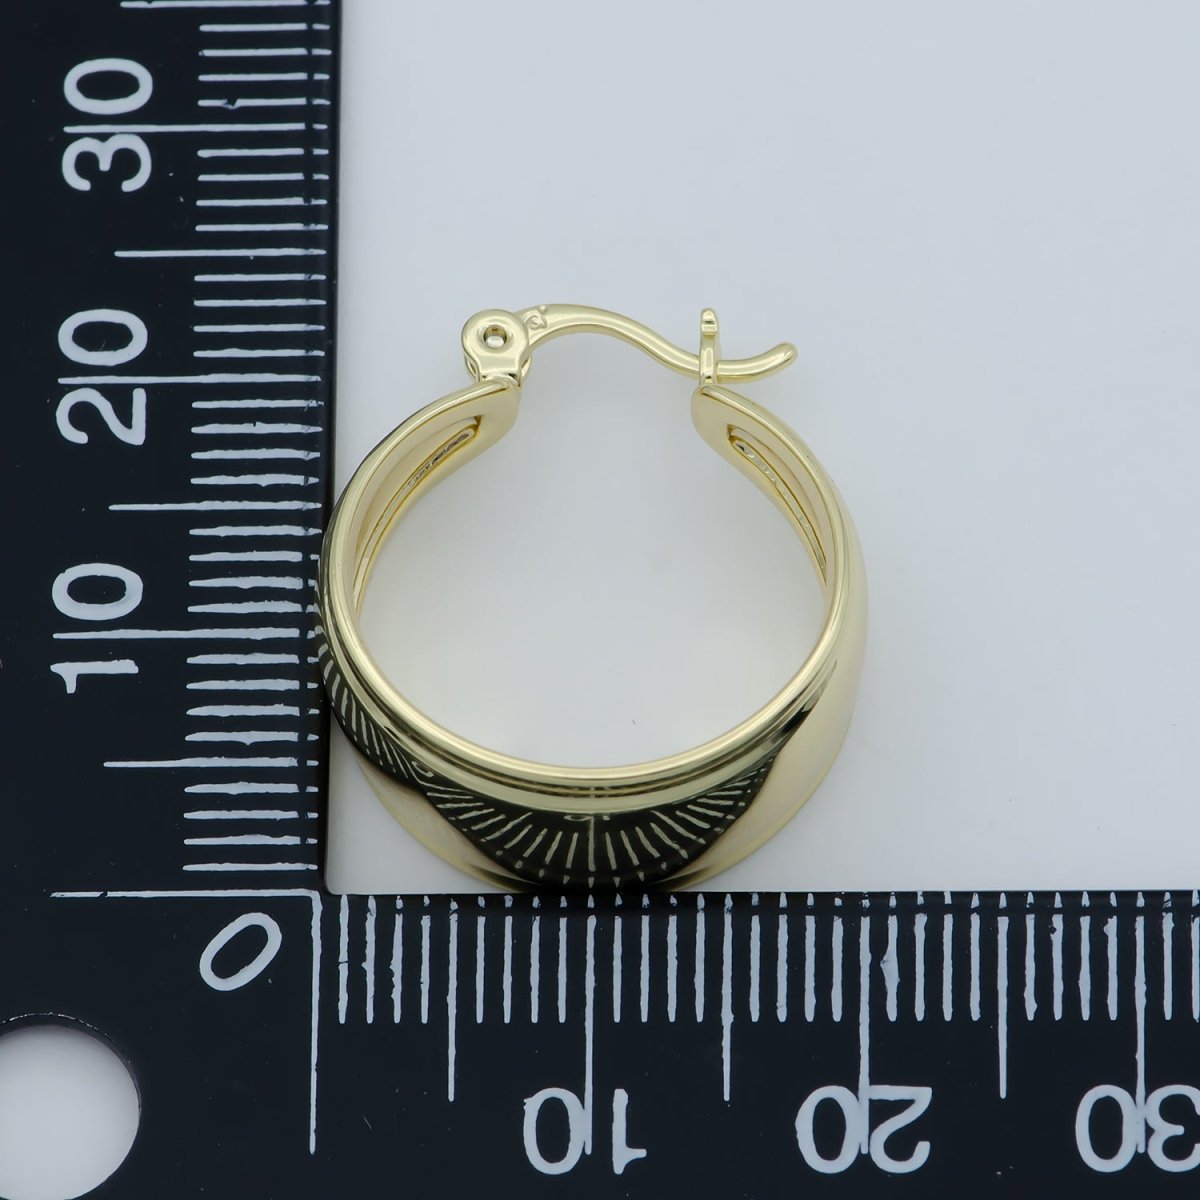 Golden Simple Round Huggies Earrings, Plain Gold Filled Geometric Formal/Casual Daily Wear Earring Jewelry P-256 - DLUXCA